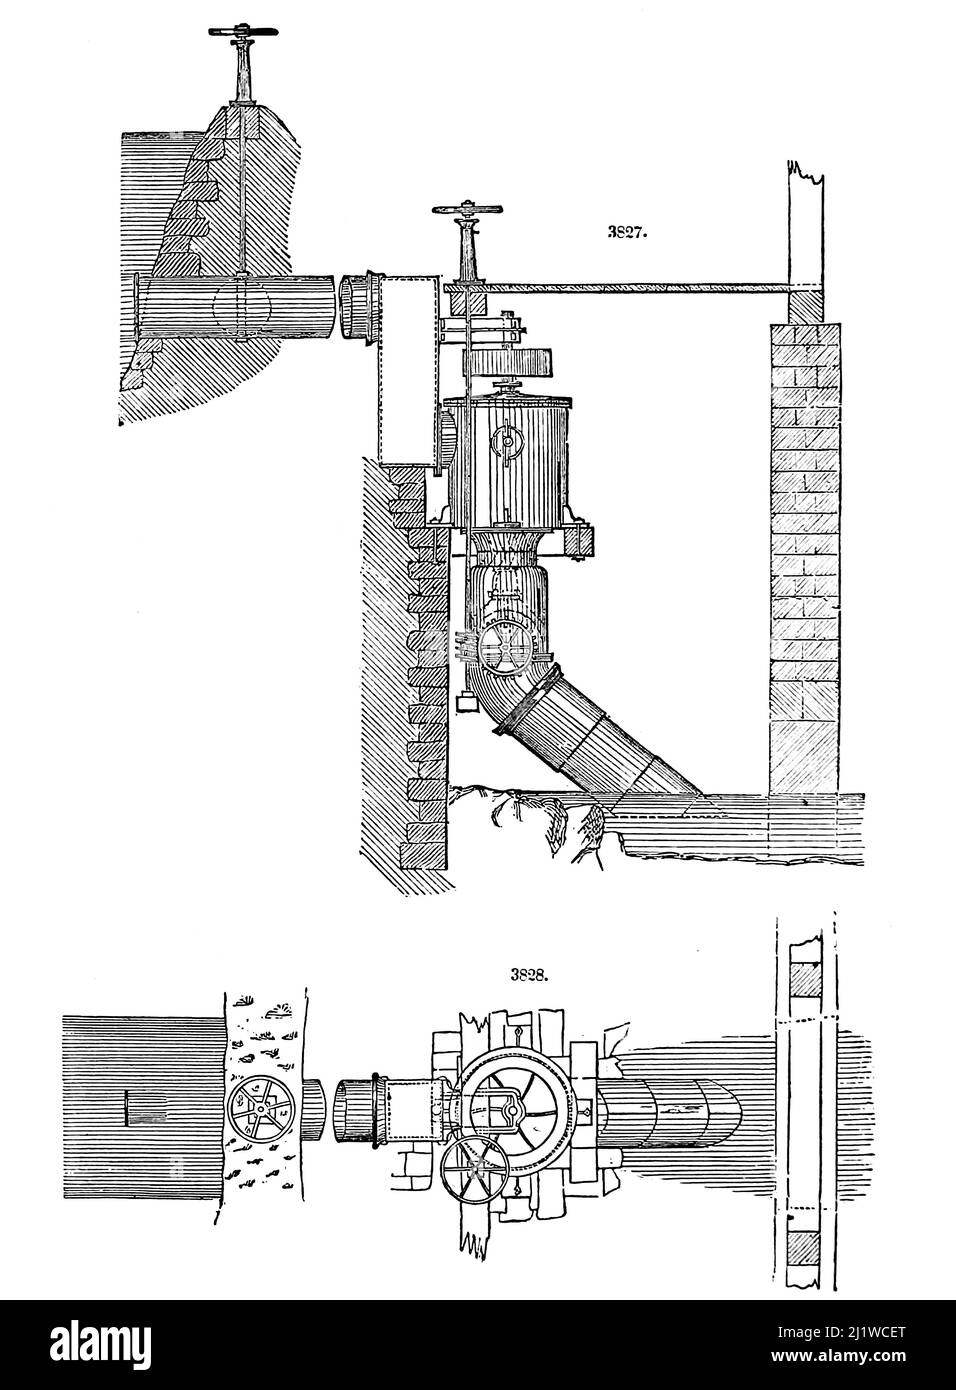 from Appleton's dictionary of machines, mechanics, engine-work, and engineering : illustrated with four thousand engravings on wood ; in two volumes by D. Appleton and Company Published New York : D. Appleton and Co 1873 Stock Photo